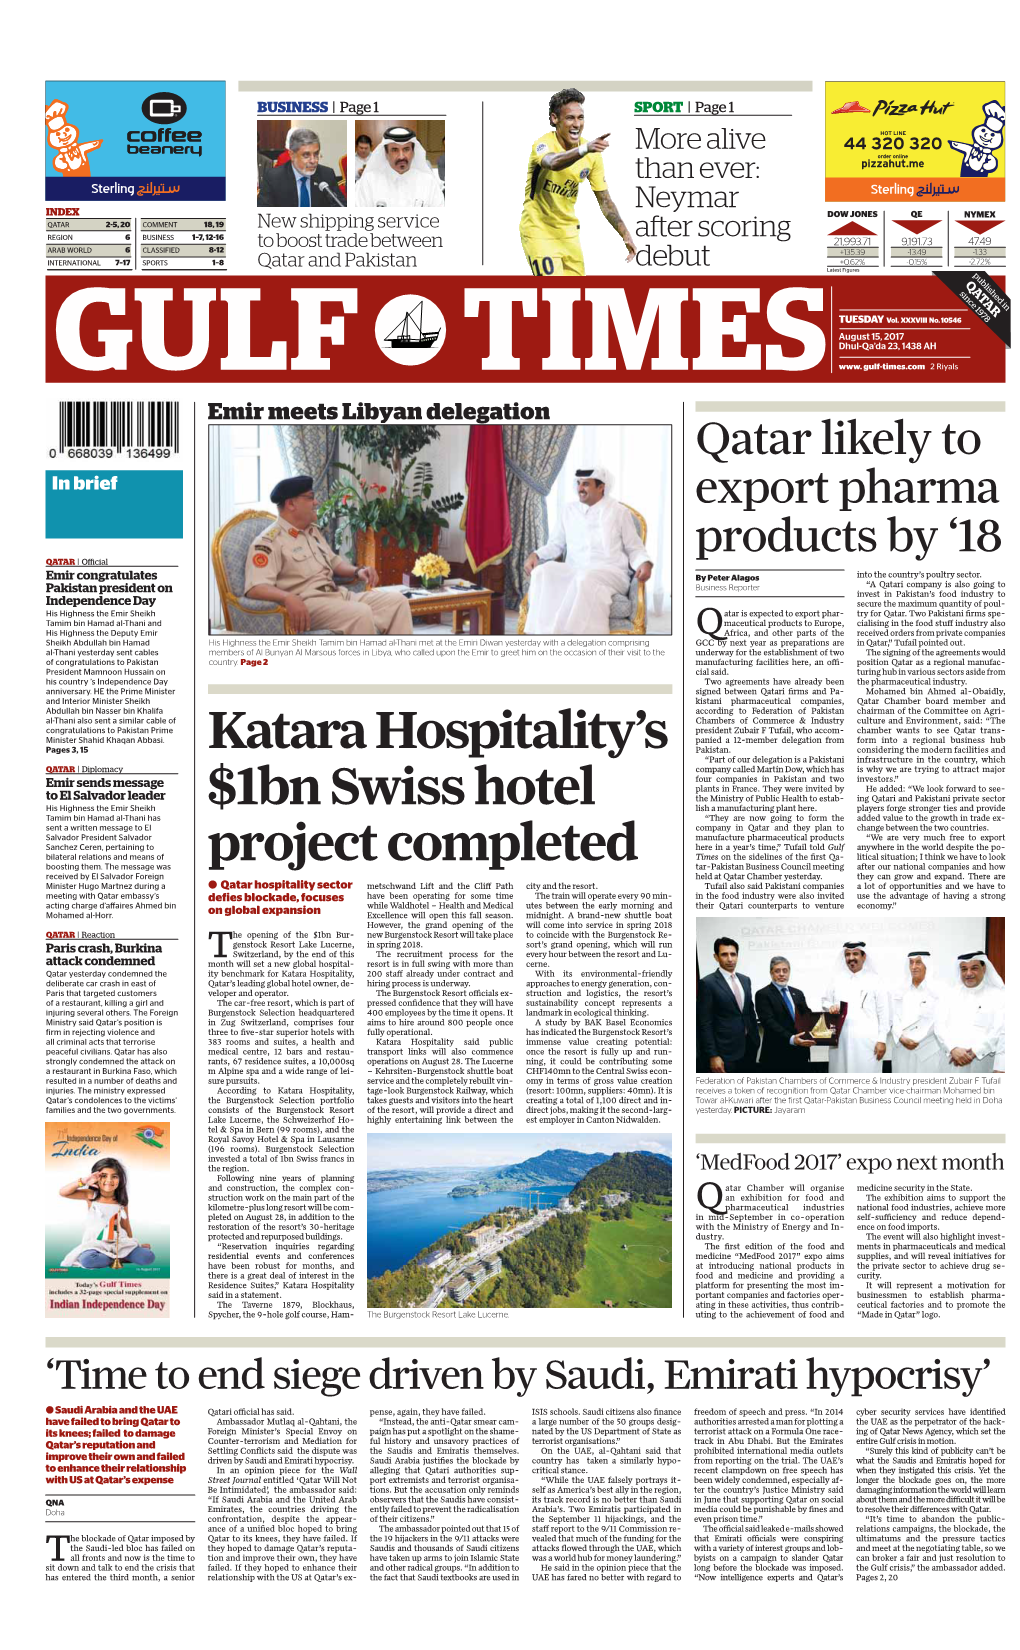 Katara Hospitality's $1Bn Swiss Hotel Project Completed